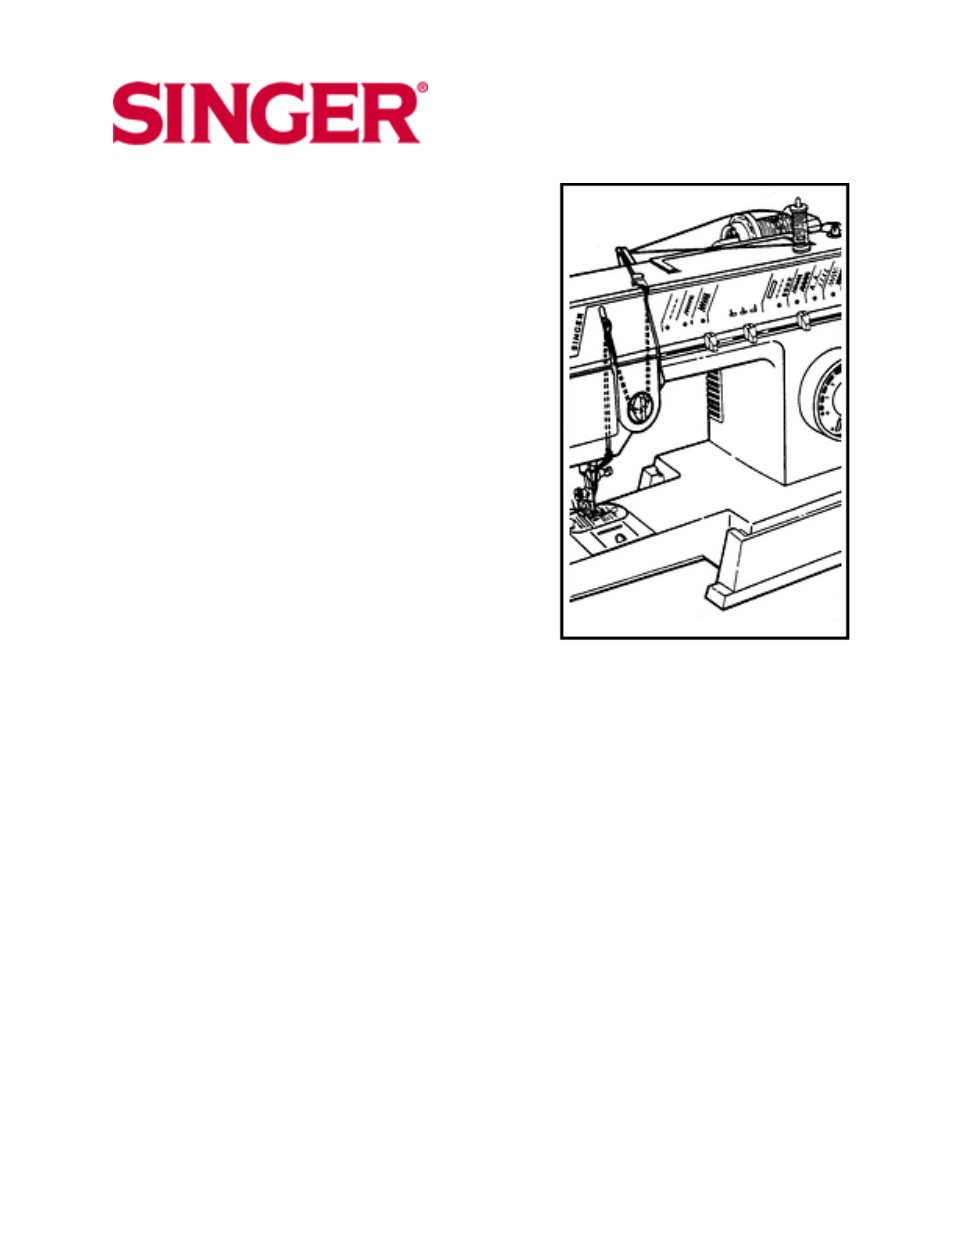 SINGER 10 User Manual | Page 40 / 47 | Original mode | Also for: 8020